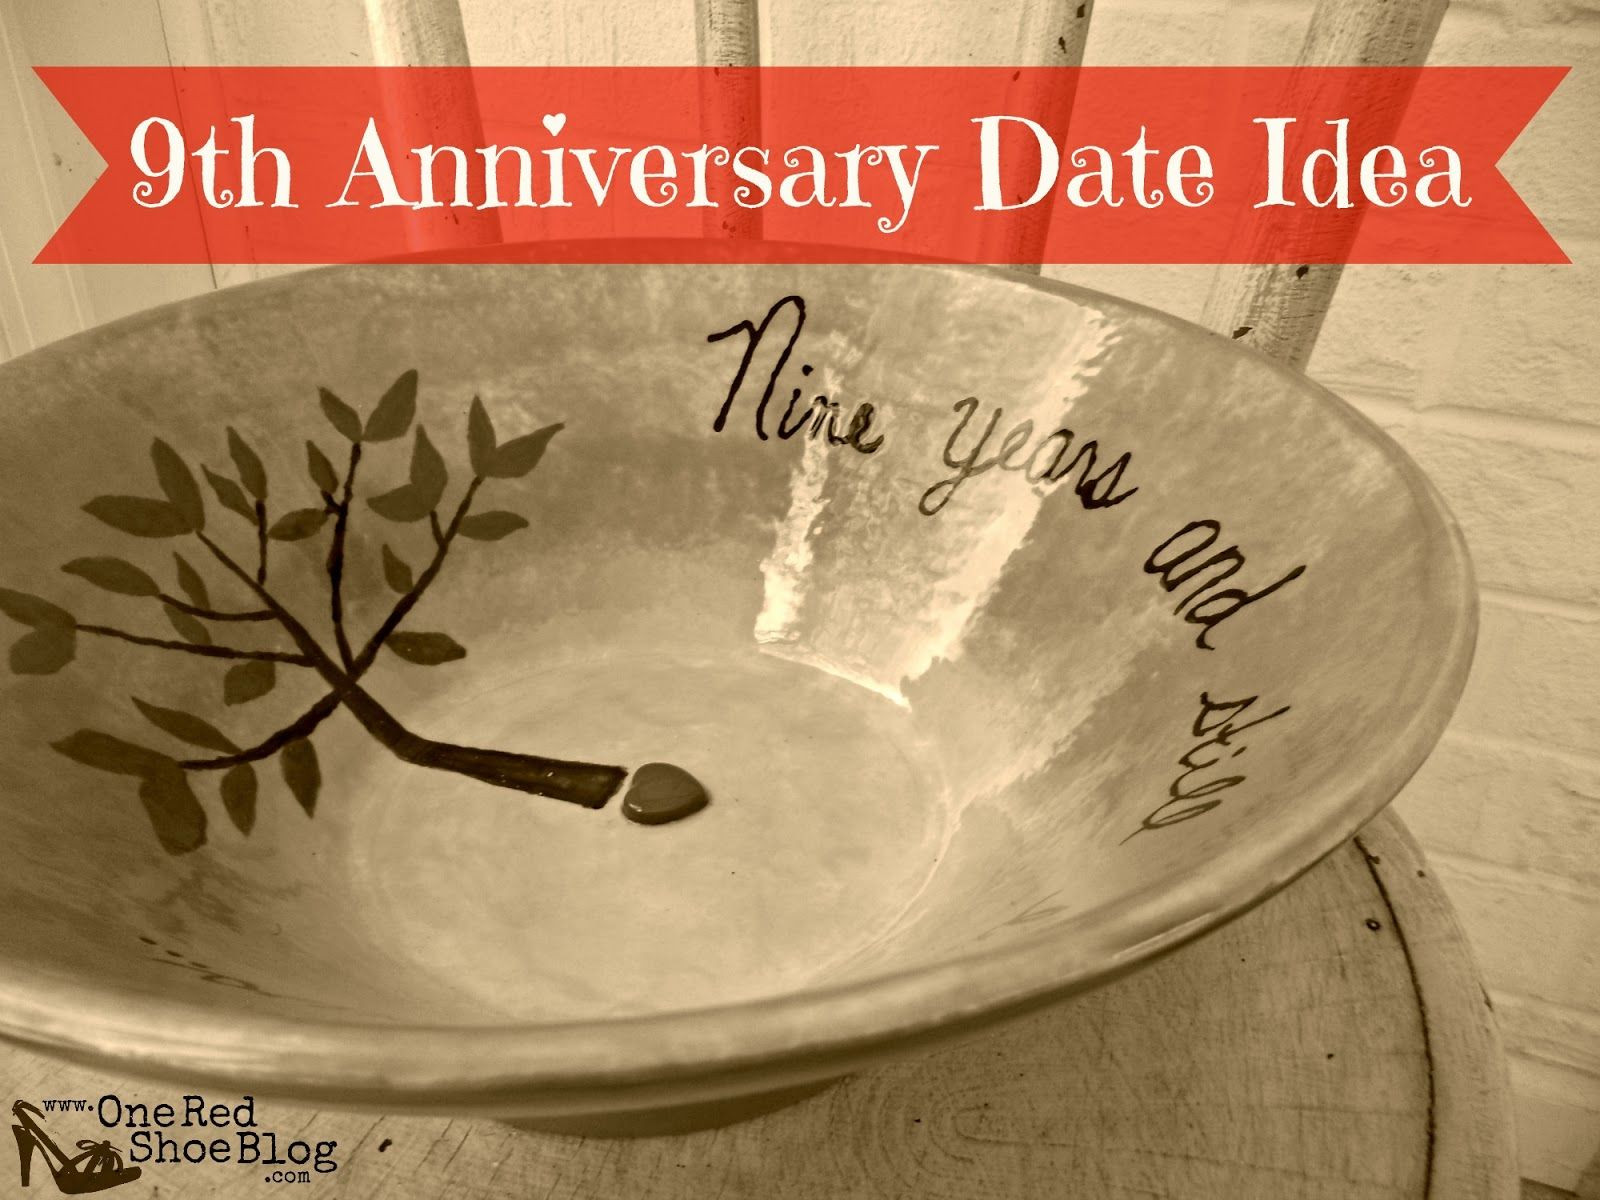 Ninth Anniversary Gift Ideas
 9th anniversary pottery idea for anniversary date night